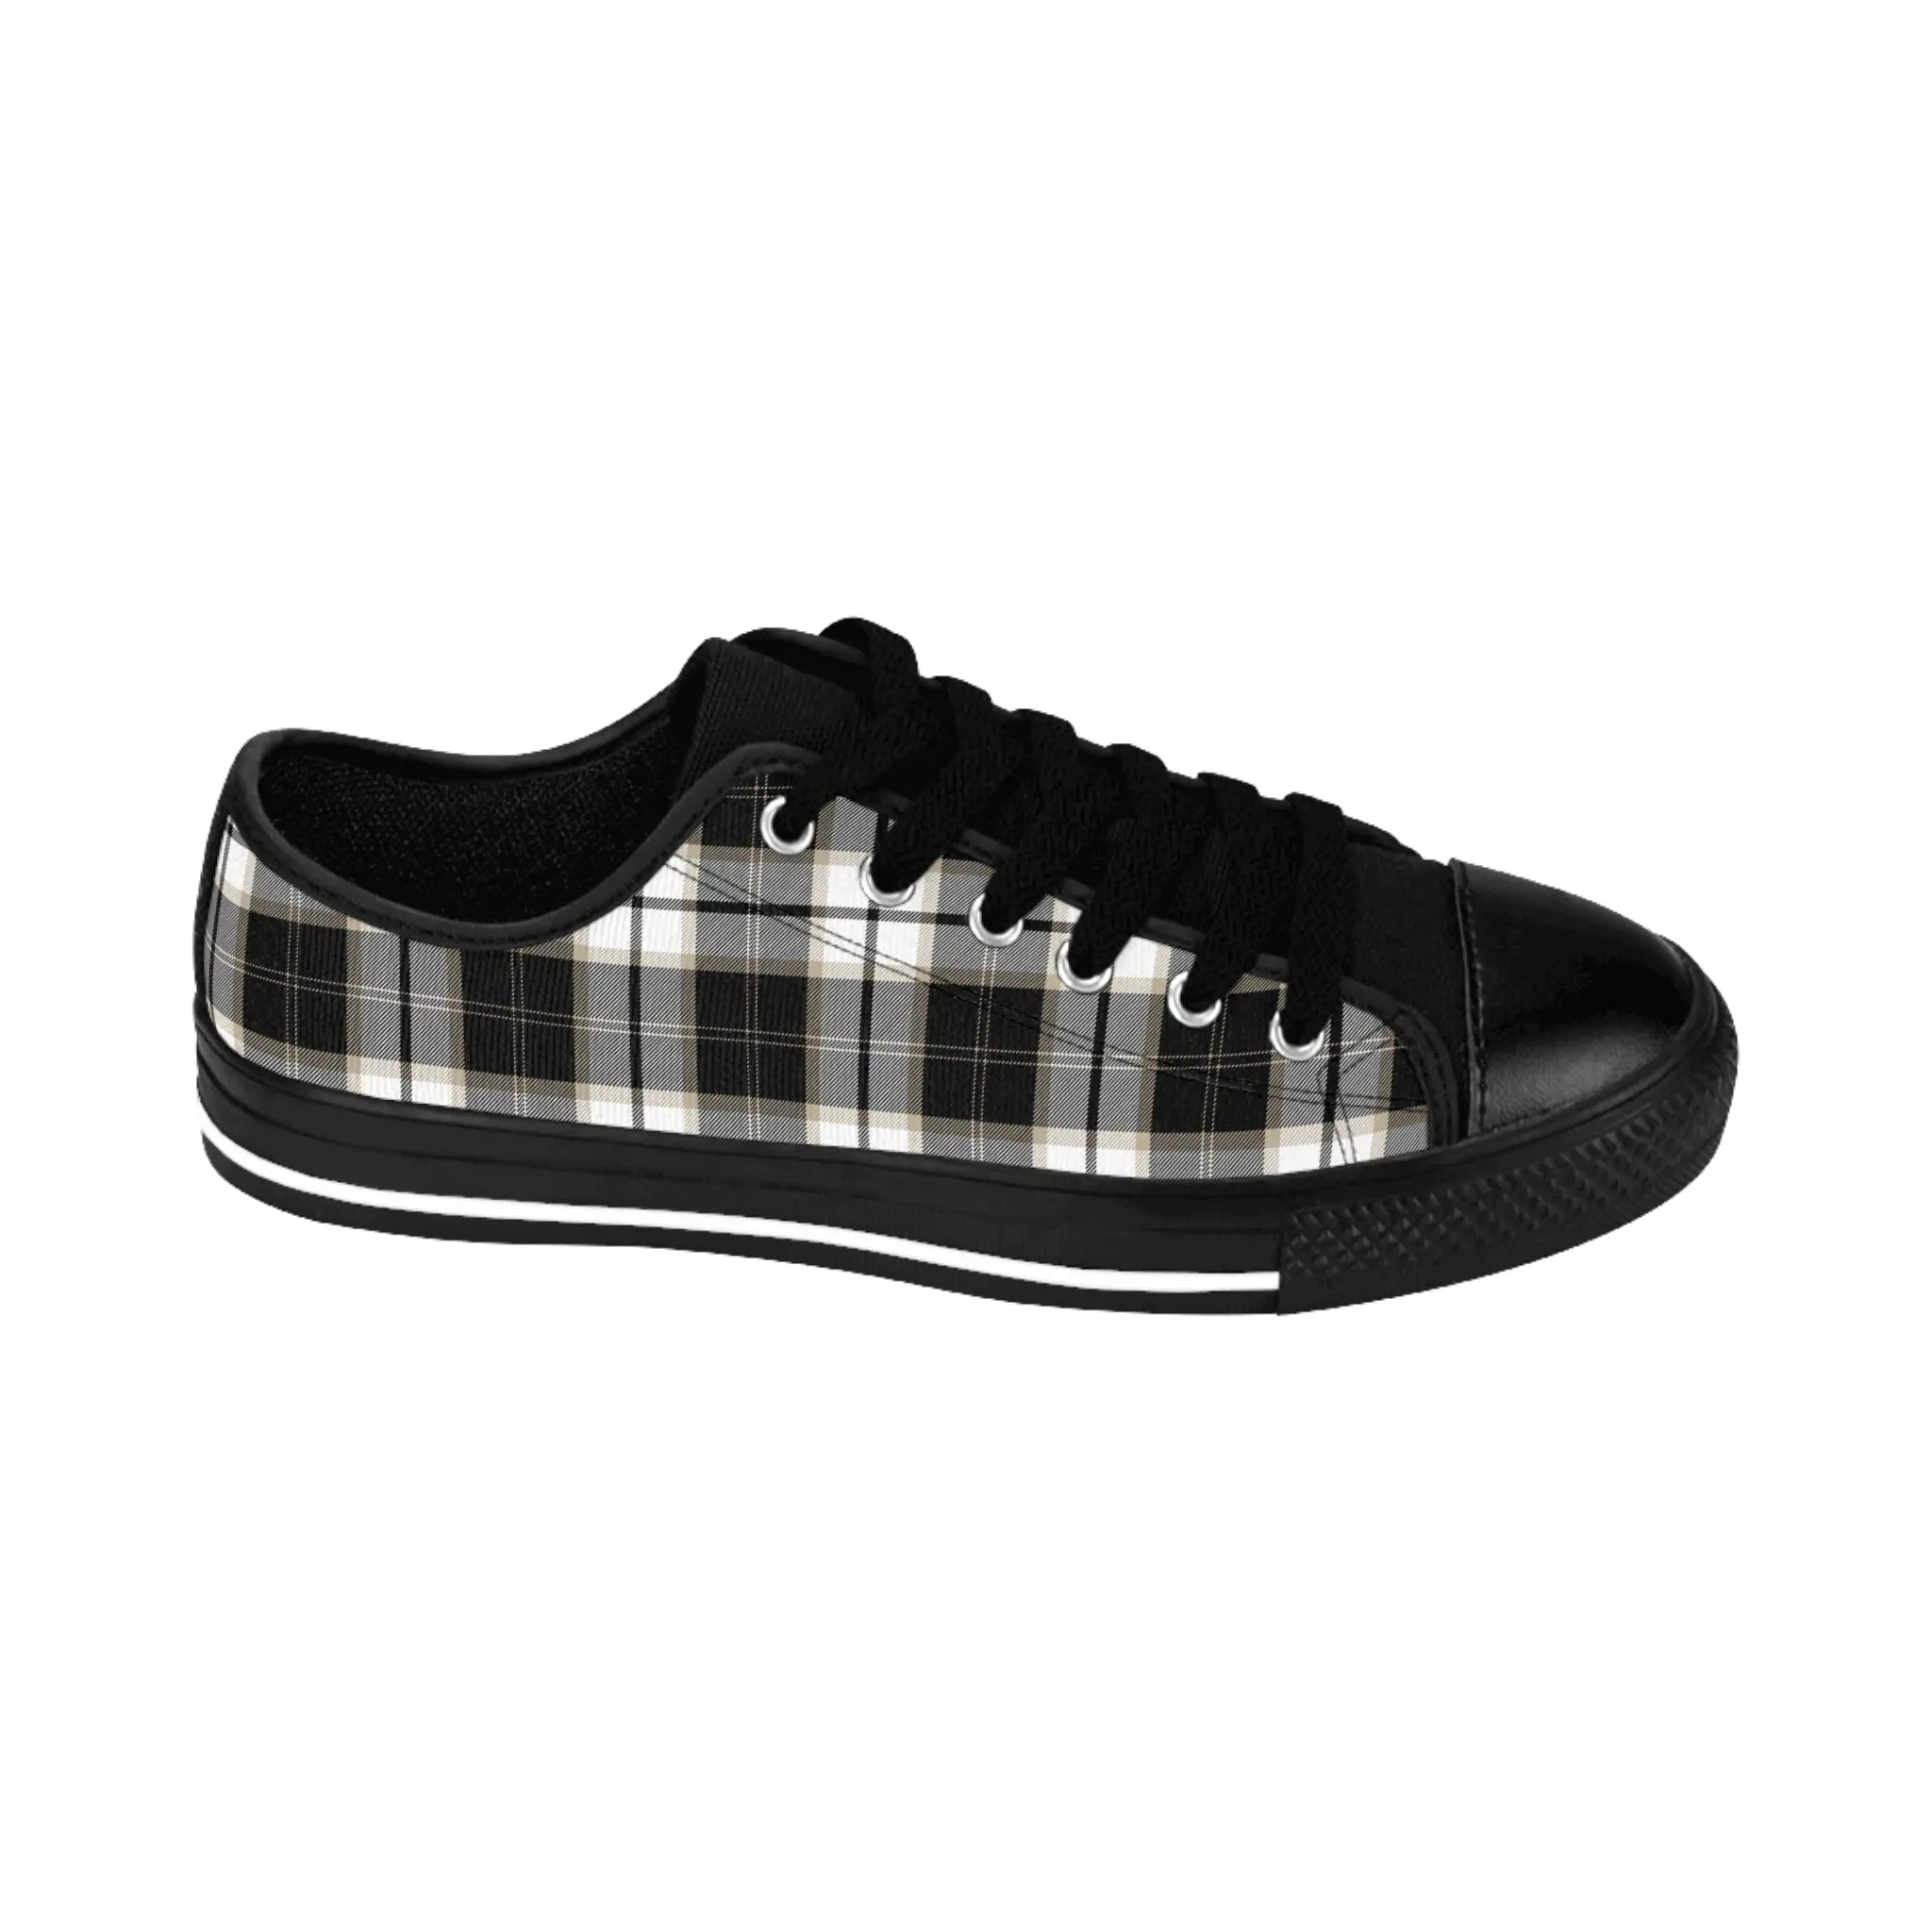  Groove Fashion Collection Black and White Plaid Women's Low Top Canvas Shoes ShoesUS12Blacksole